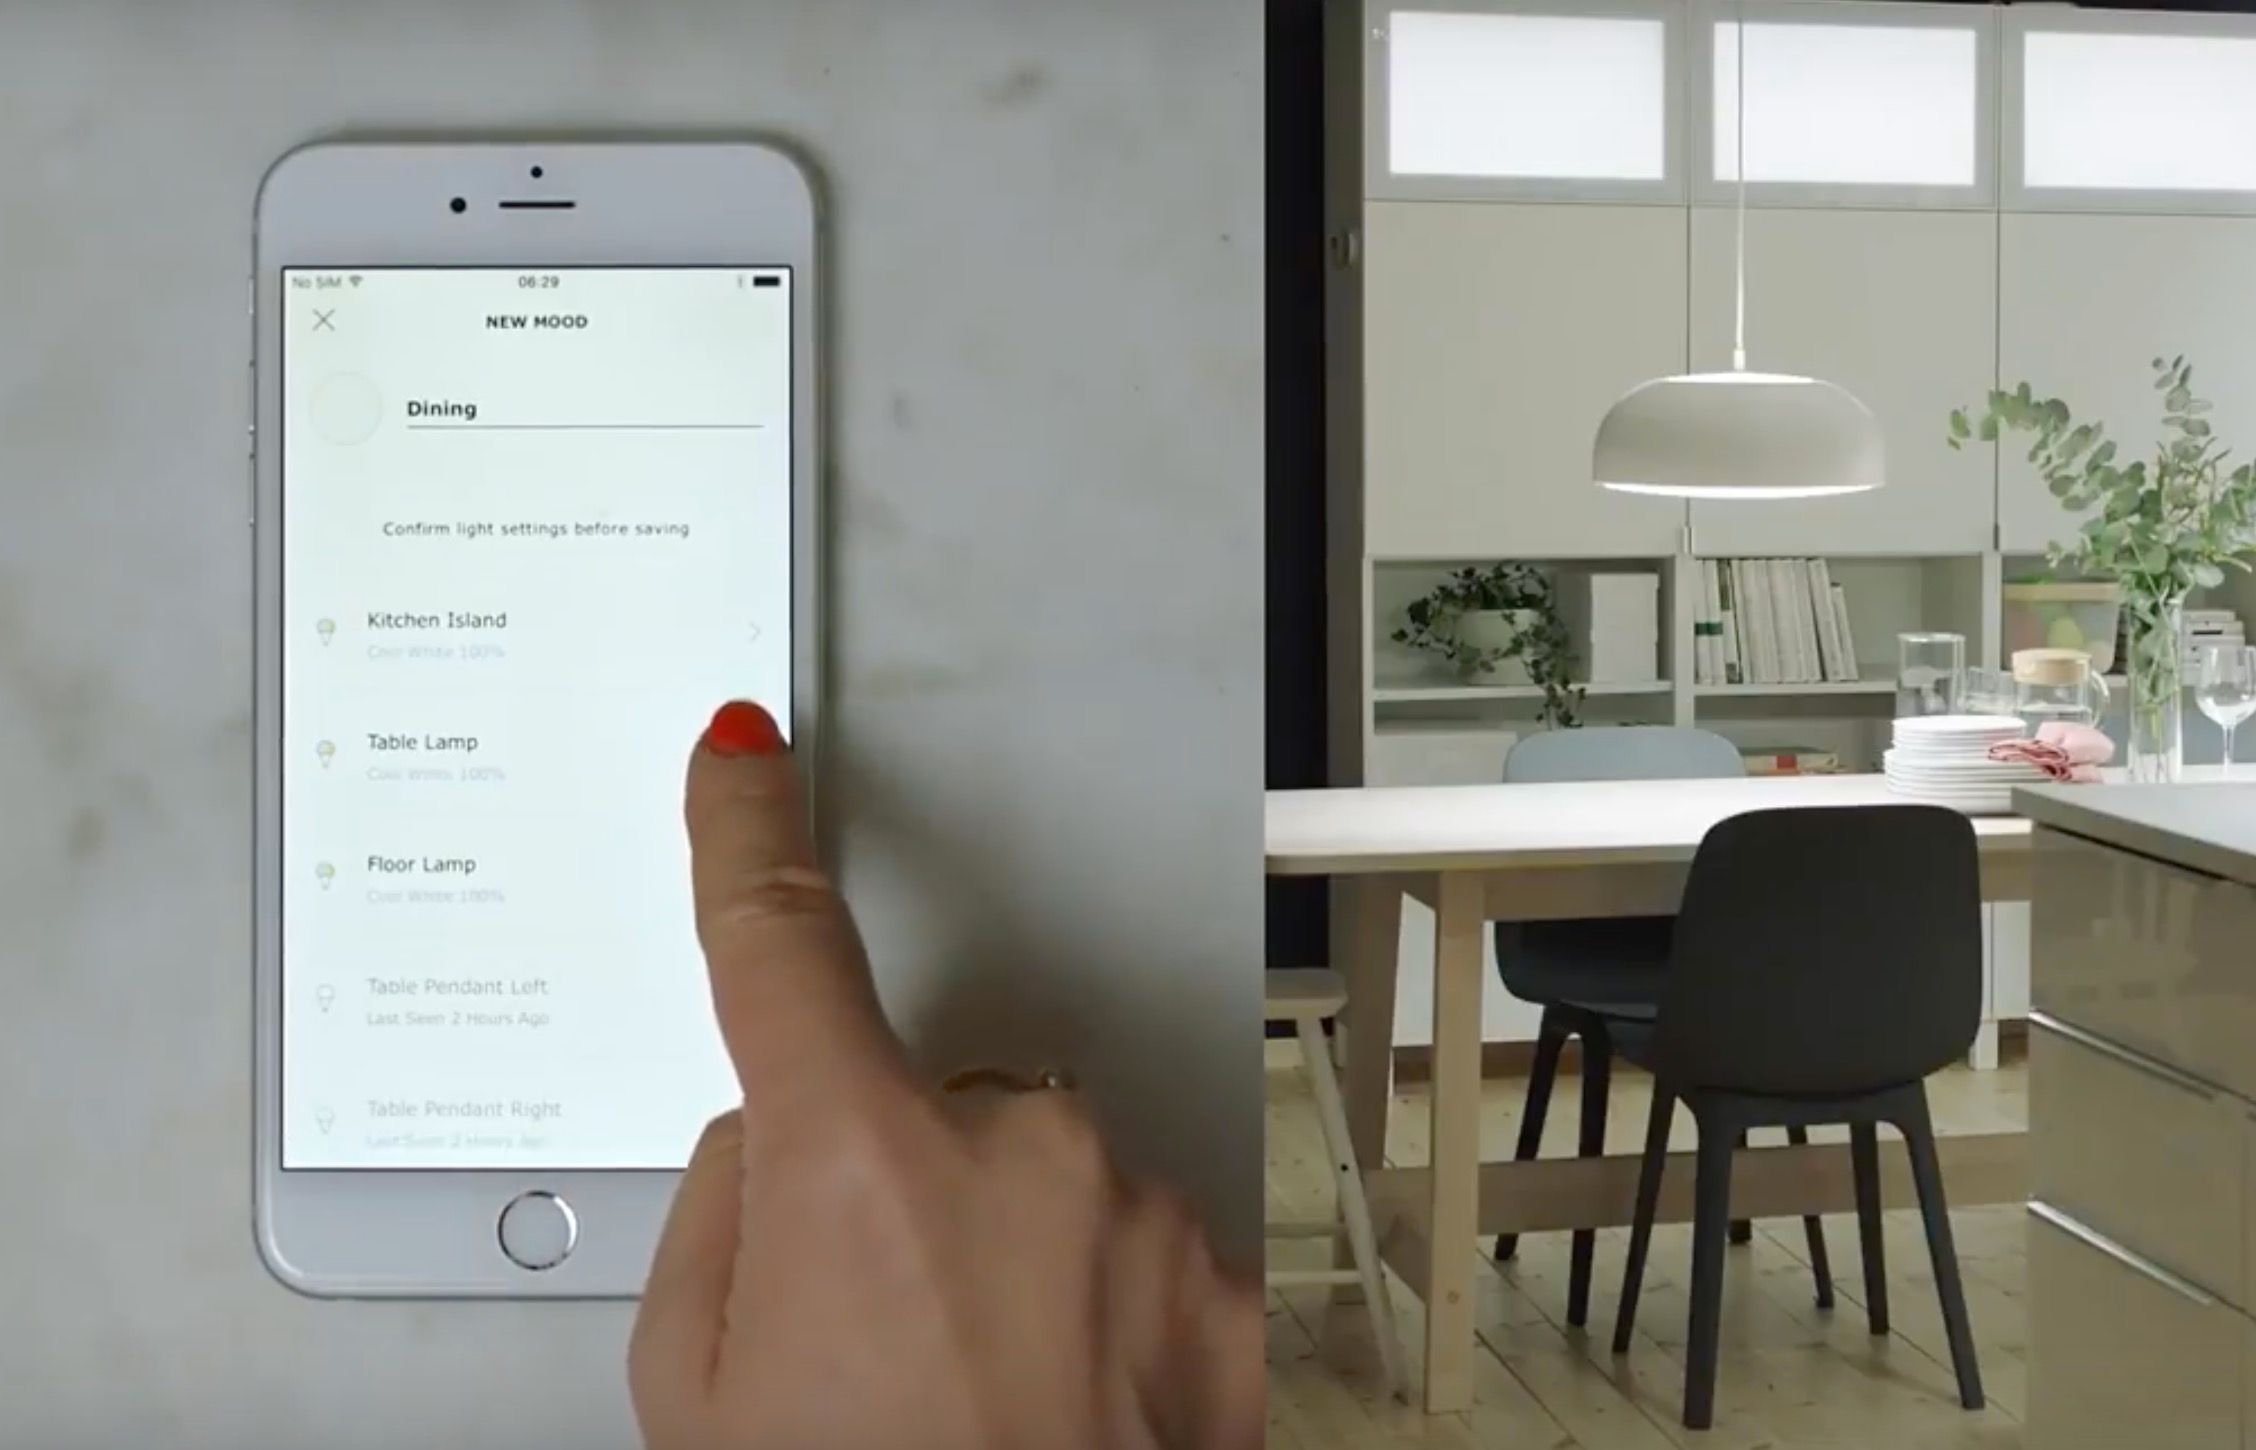 ikea goes after philips hue with own budget smart lighting collection image 1